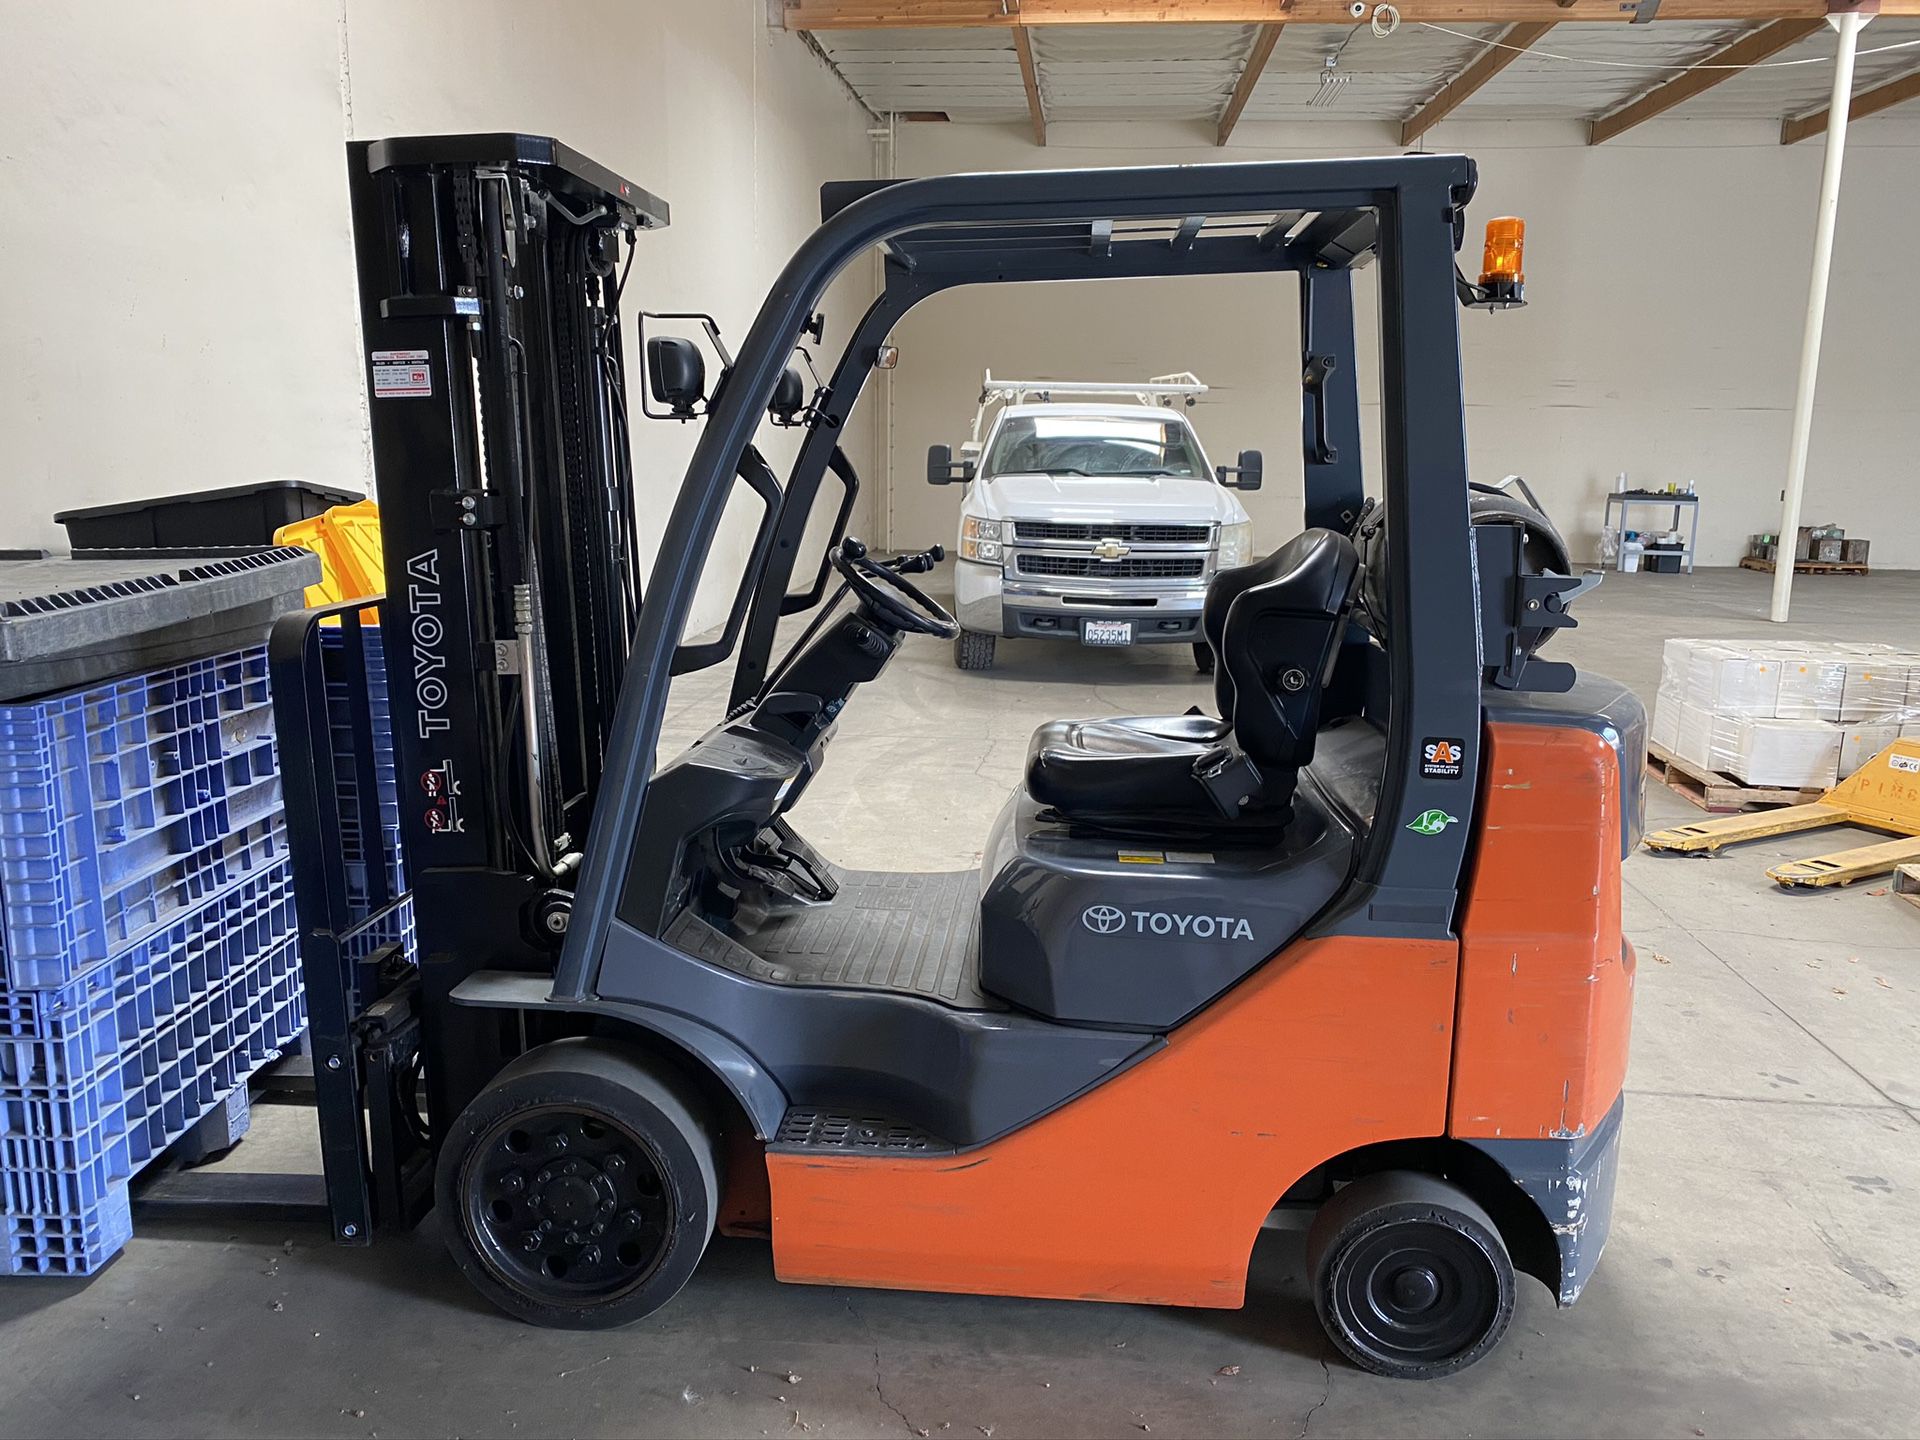 Toyota Forklift 8FGCU25 Like new 1515 hrs. Has been on factory service plan since new